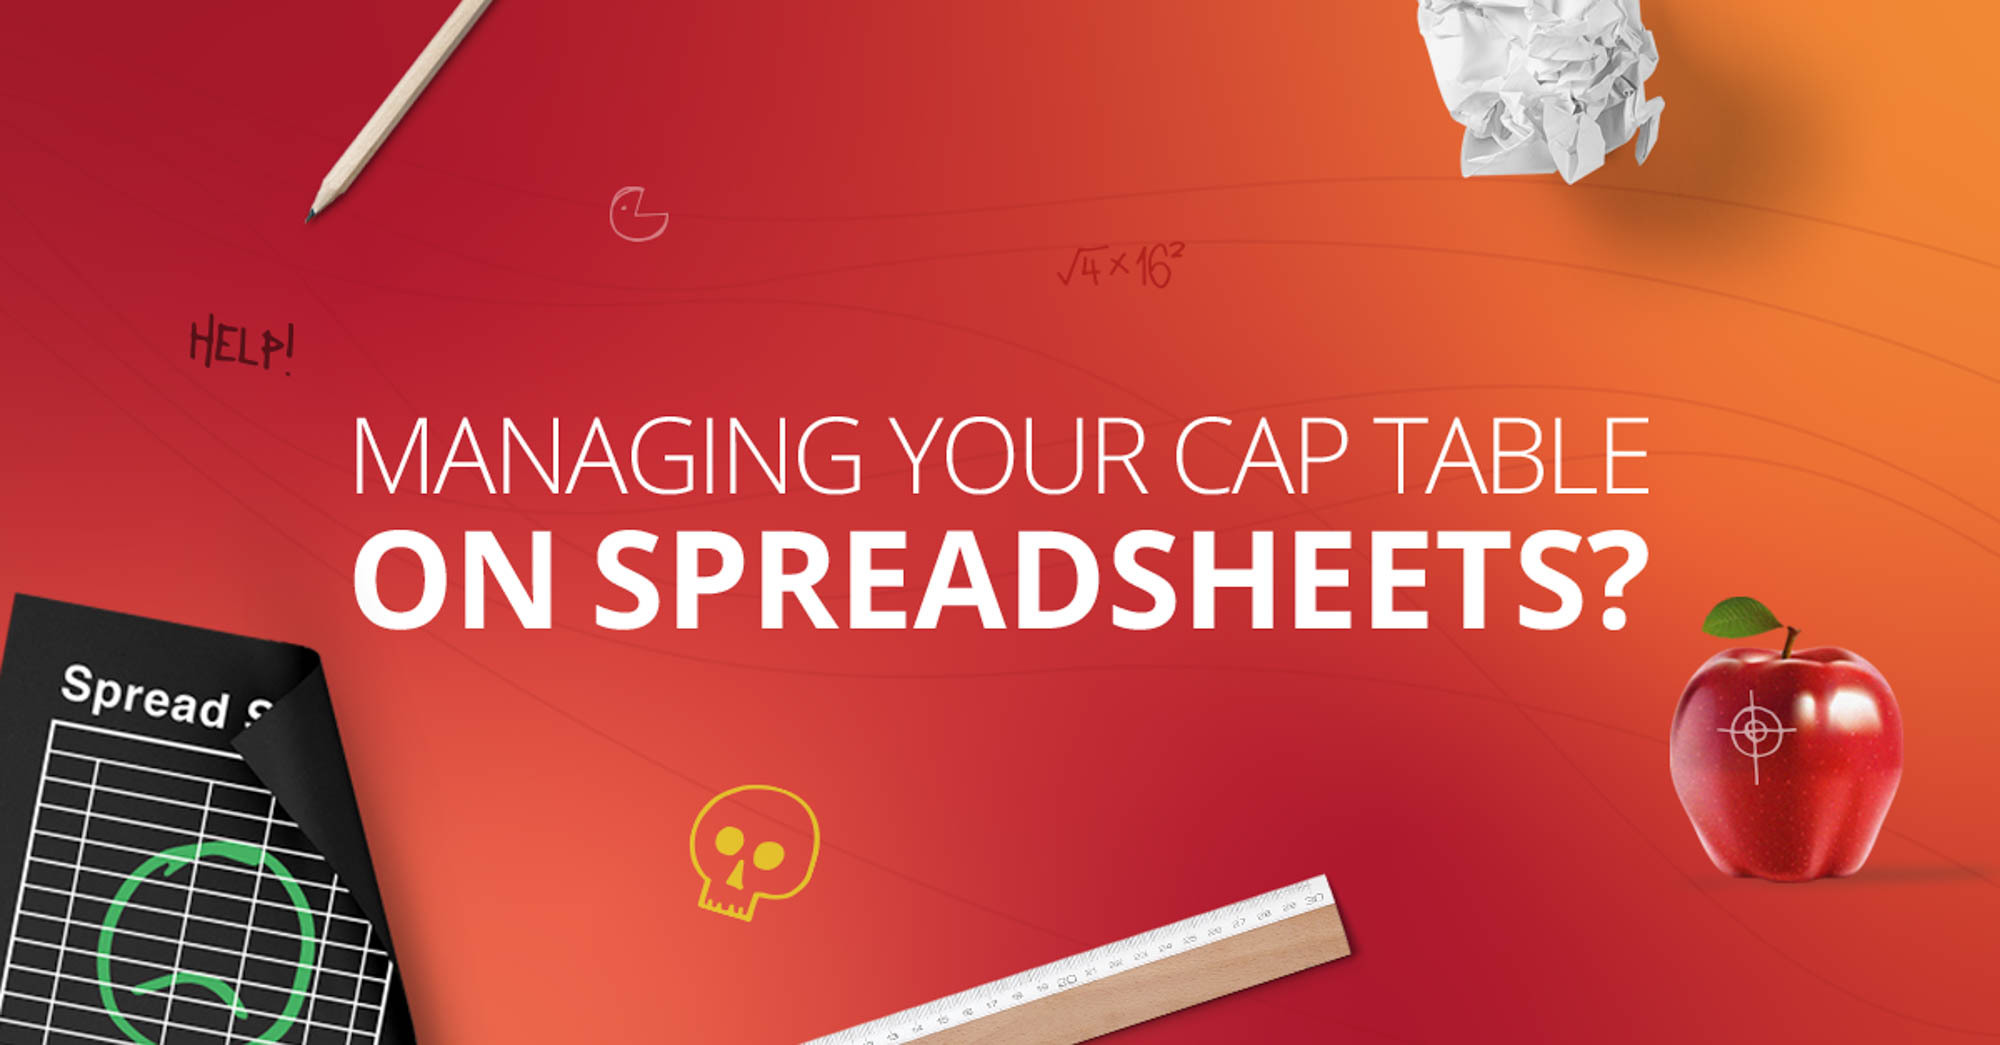 A spreadsheet is not the place to host your cap table – here’s why